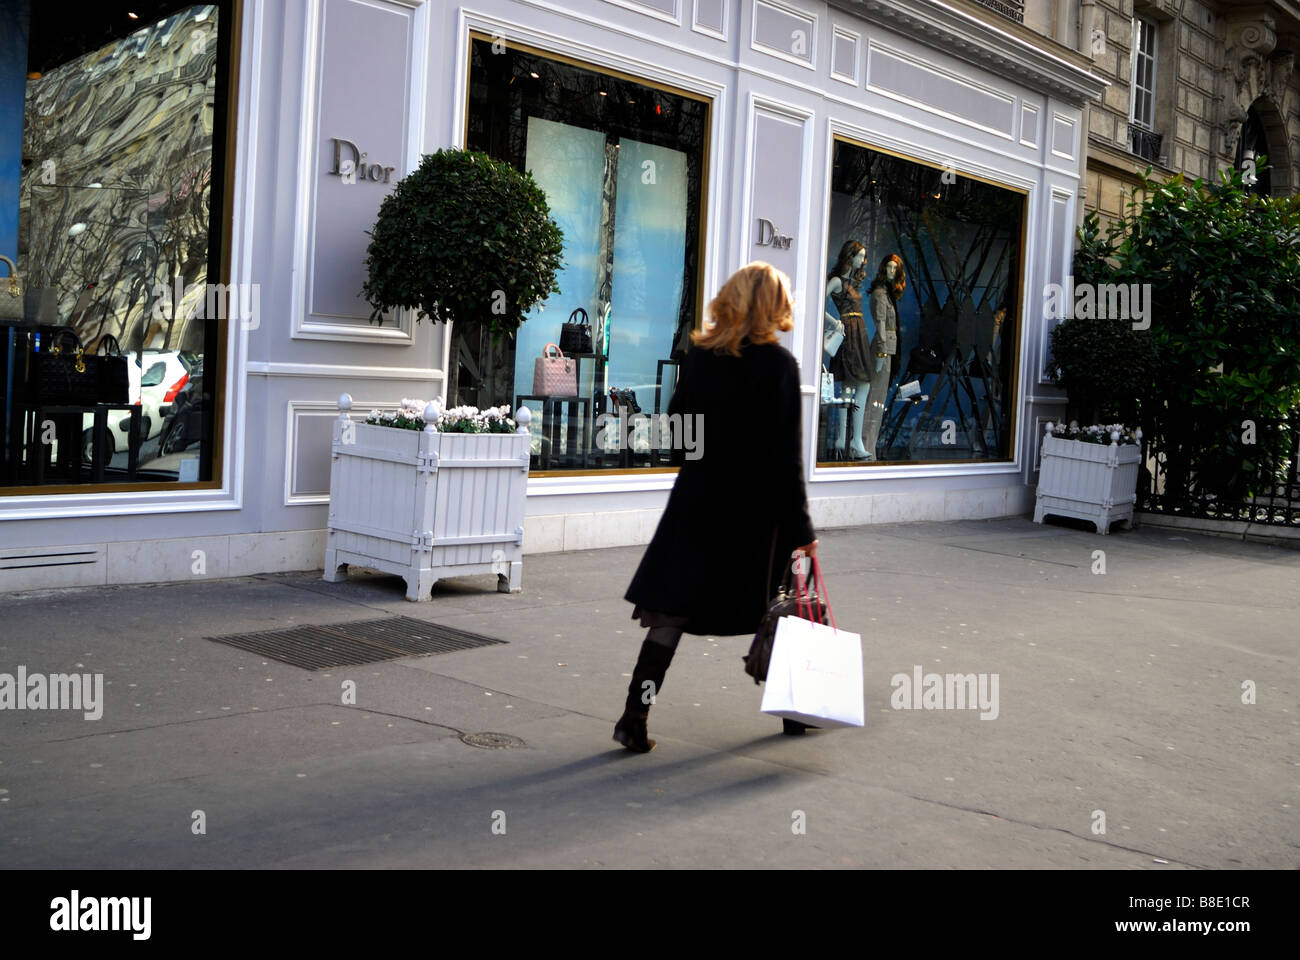 Paris, France, Luxury Shopping Street Scene Boutique Woman With Shopping Bags Walking by Christian Dior Store Shop Front WIndow, mode labels, fashion, Stock Photo